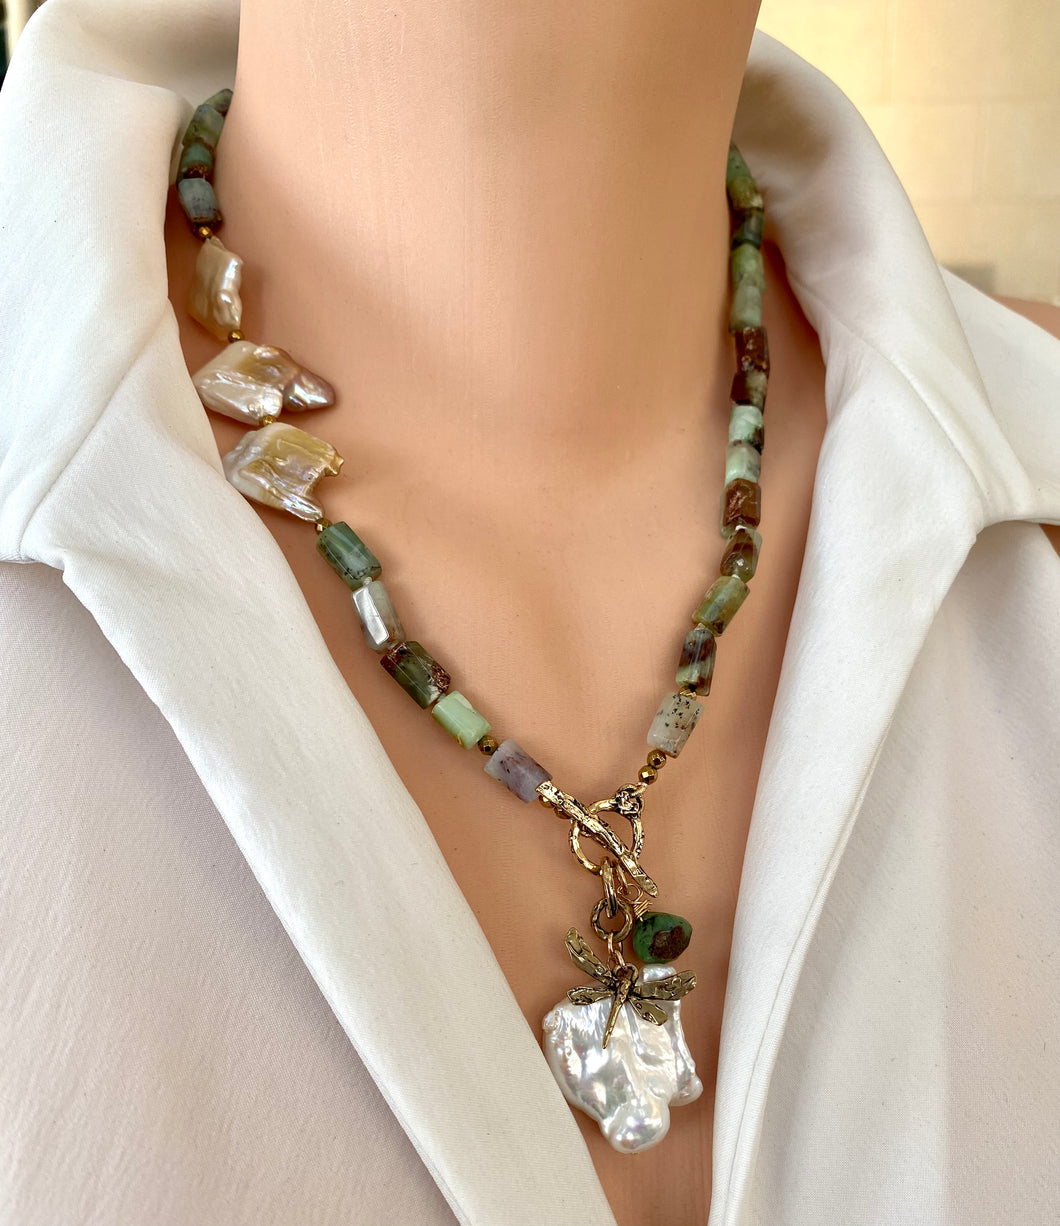 Chrysoprase Necklace, Dragonfly Charm & Baroque Pearl Pendant, Gold Bronze, Gold filled, 20